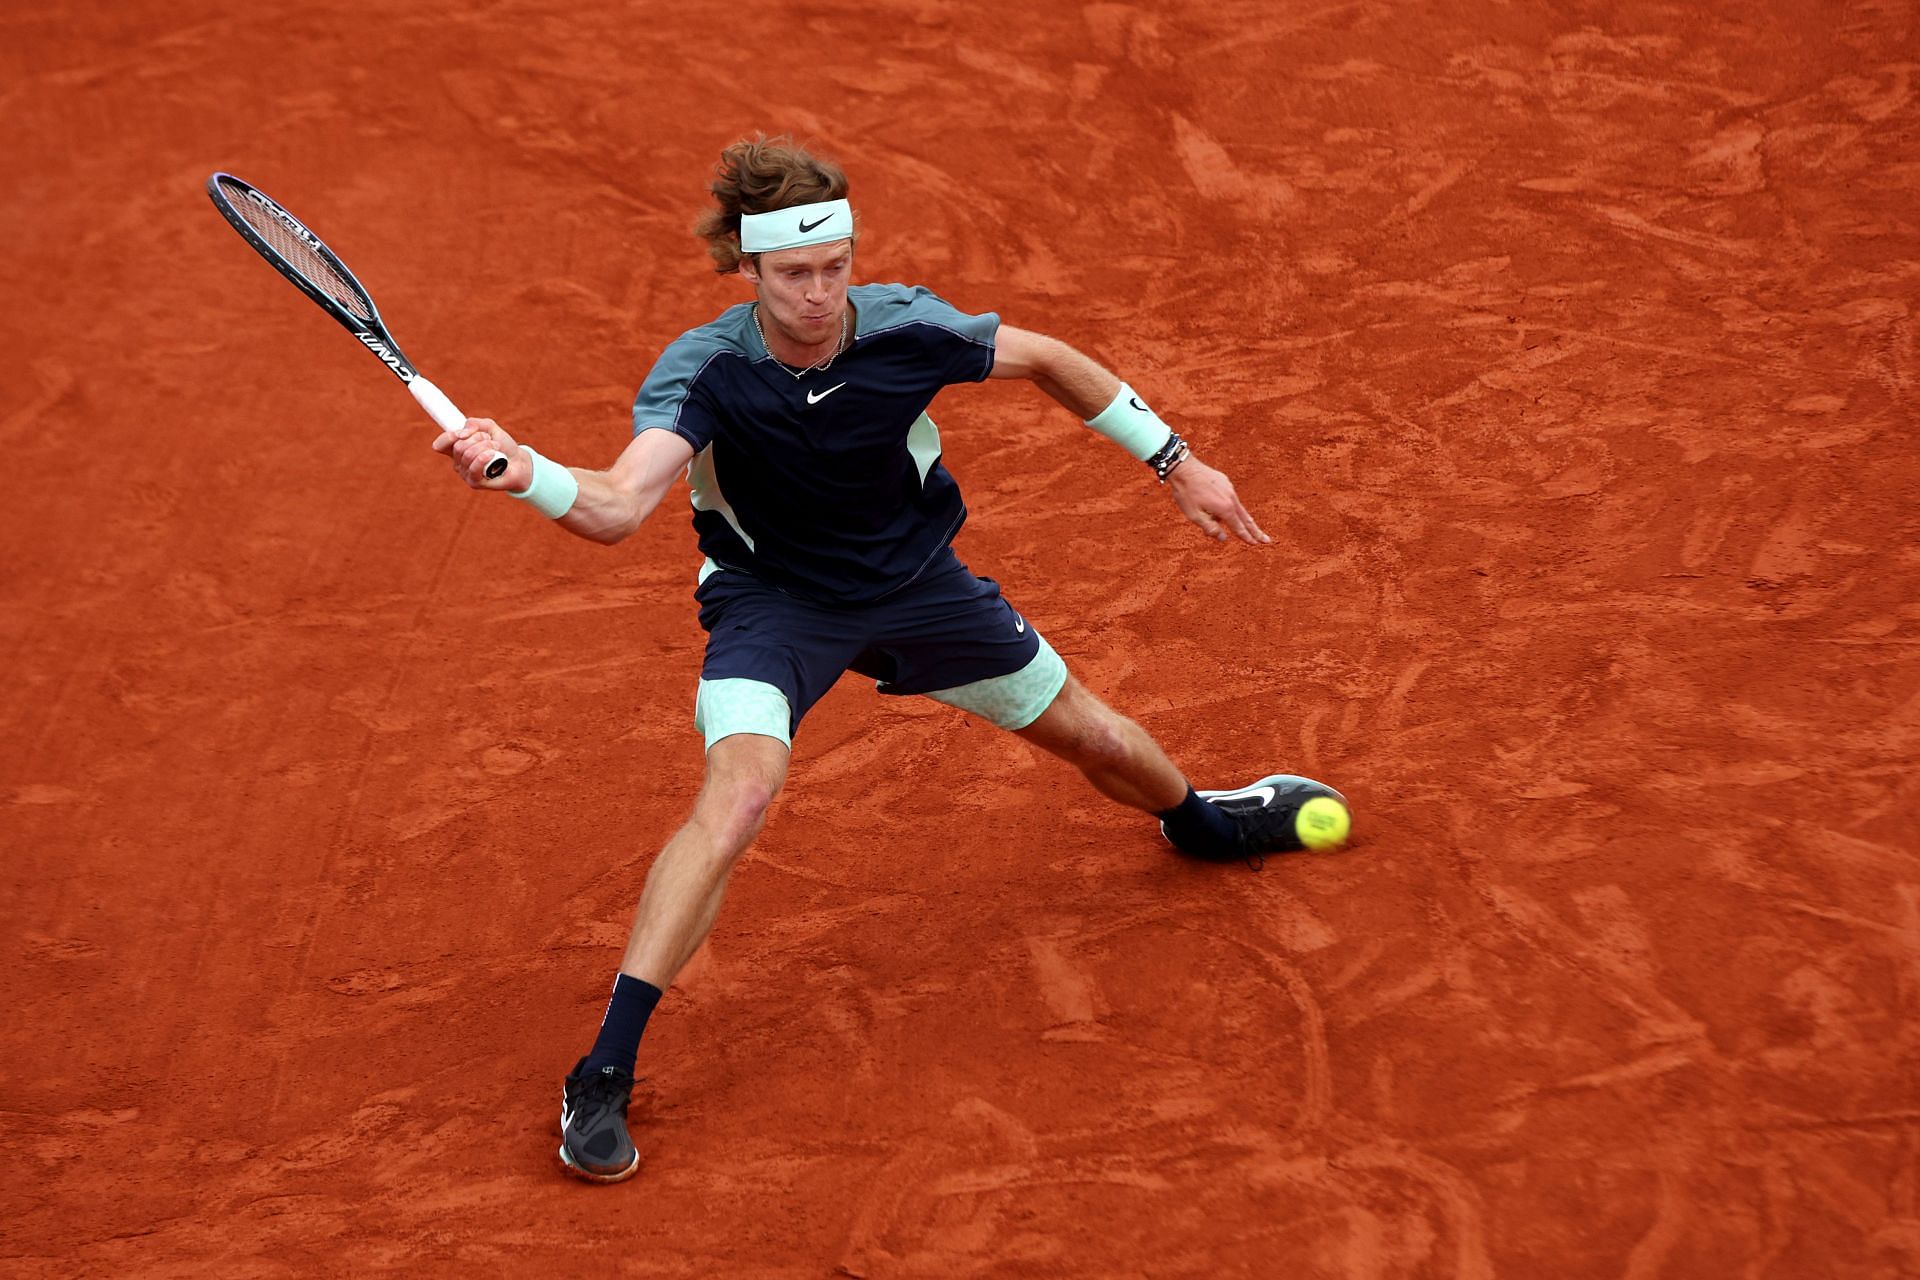 Andrey Rublev will look to beat Jannik Sinner for the second time